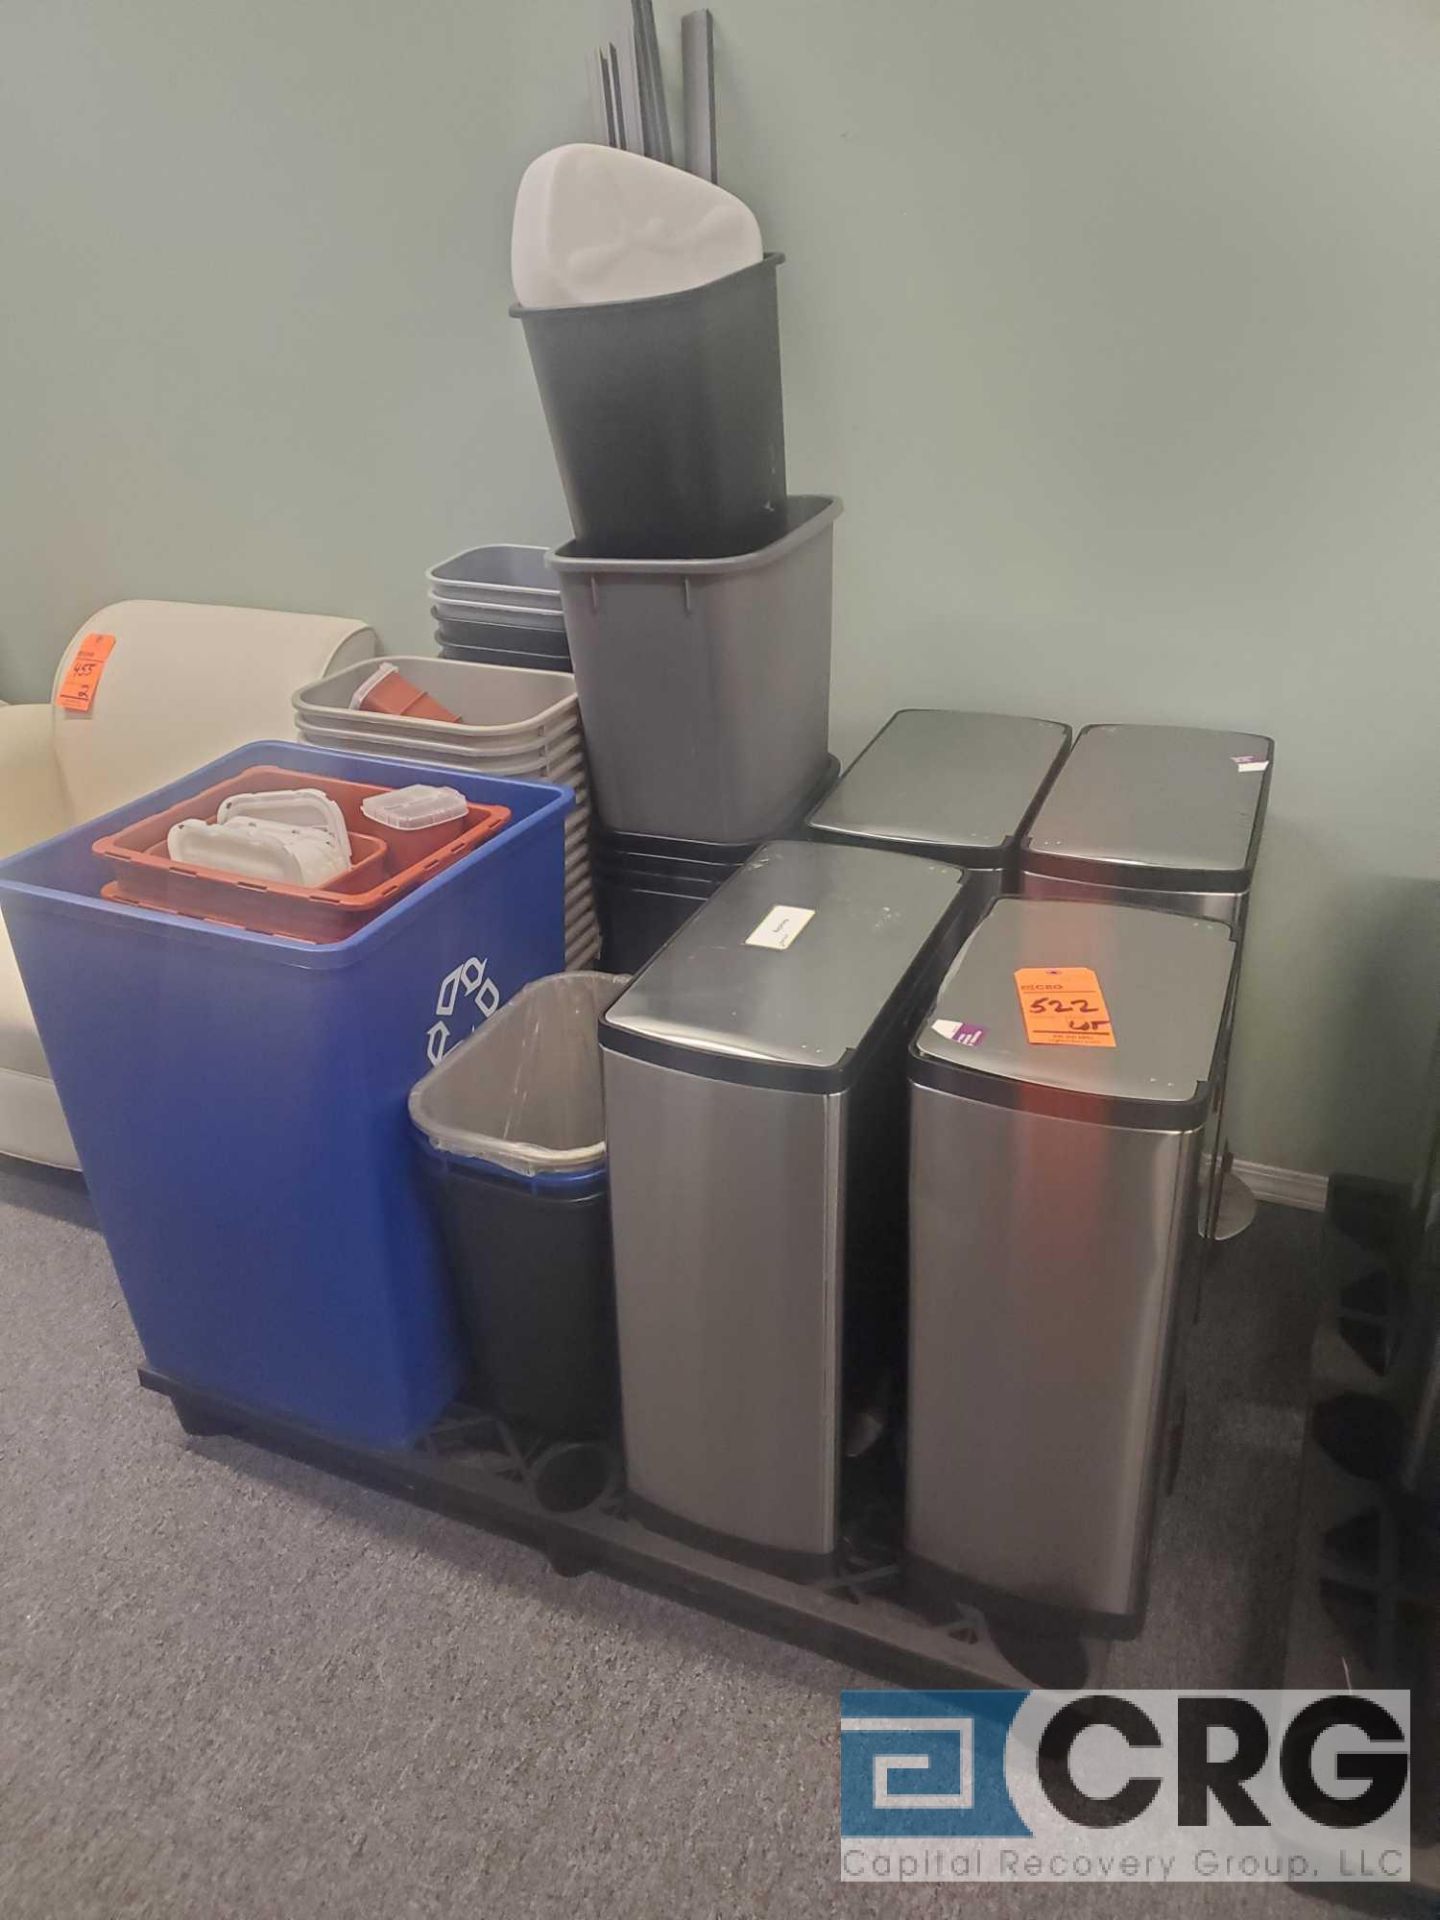 Lot of waste receptacles, sharps bins, and plastic trash cans - Image 2 of 2